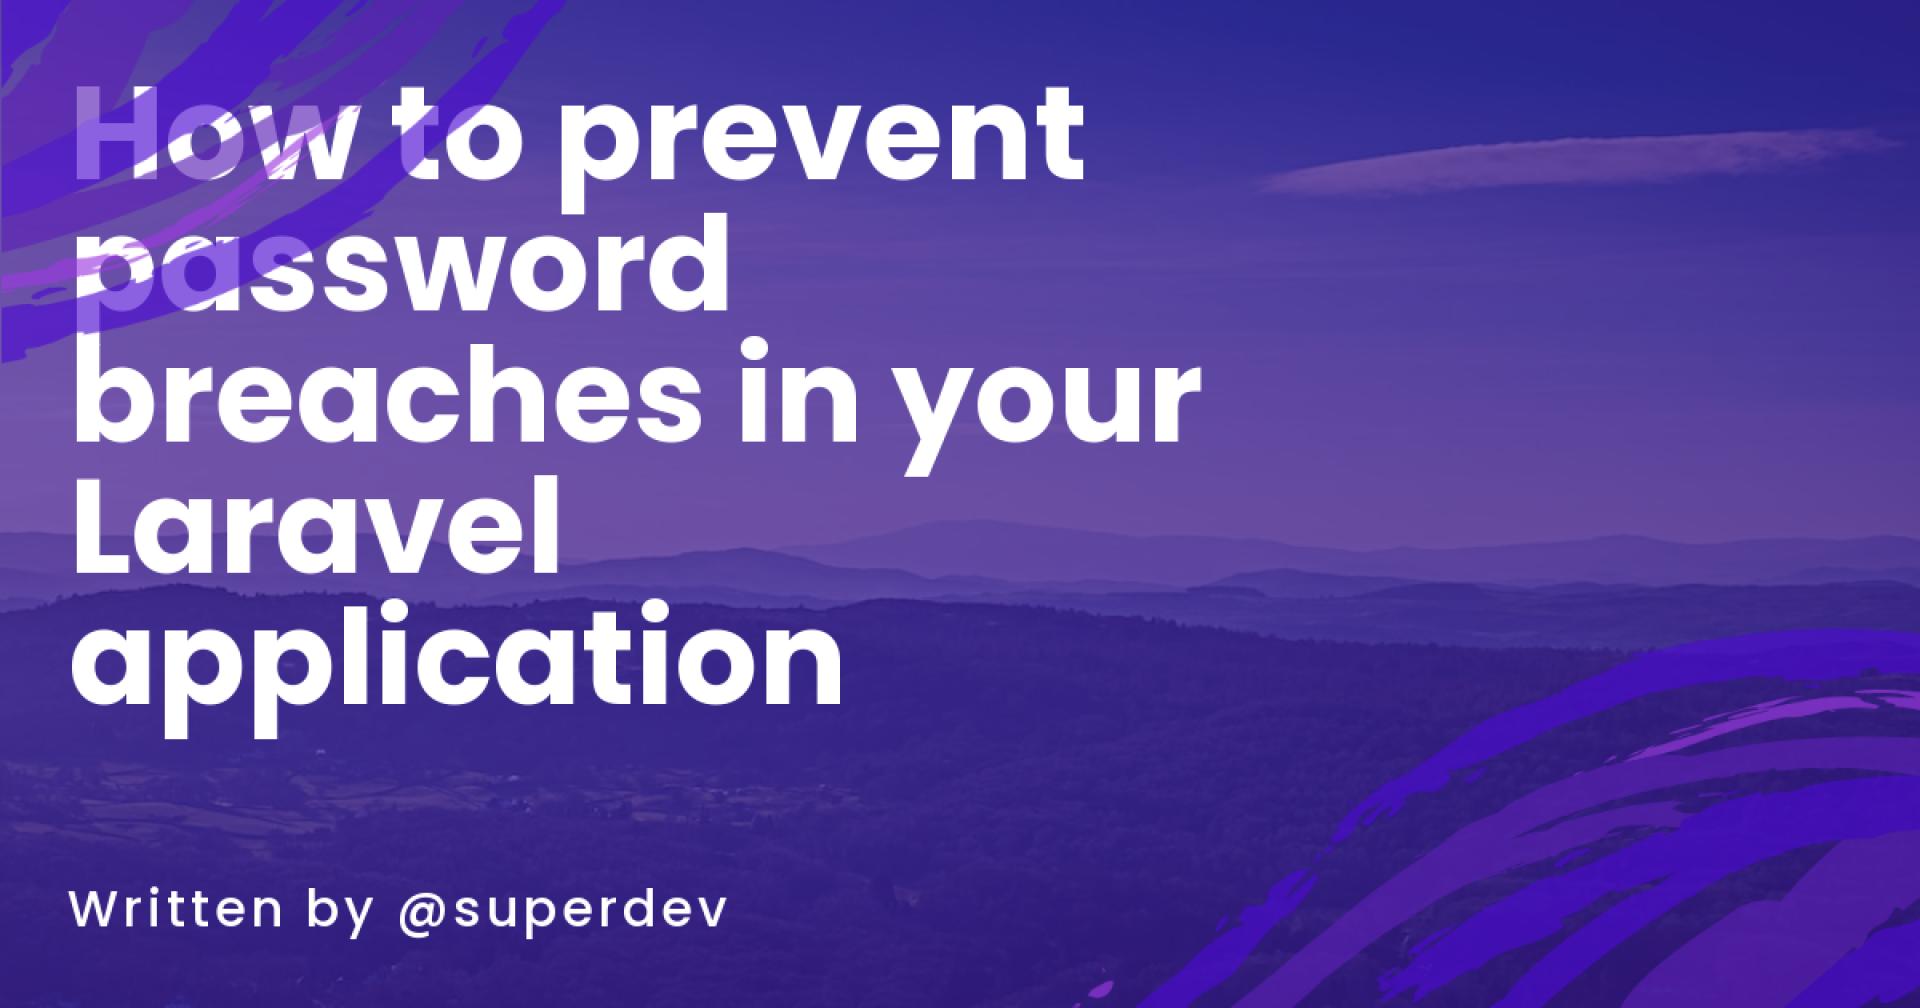 How to prevent password breaches in your Laravel application